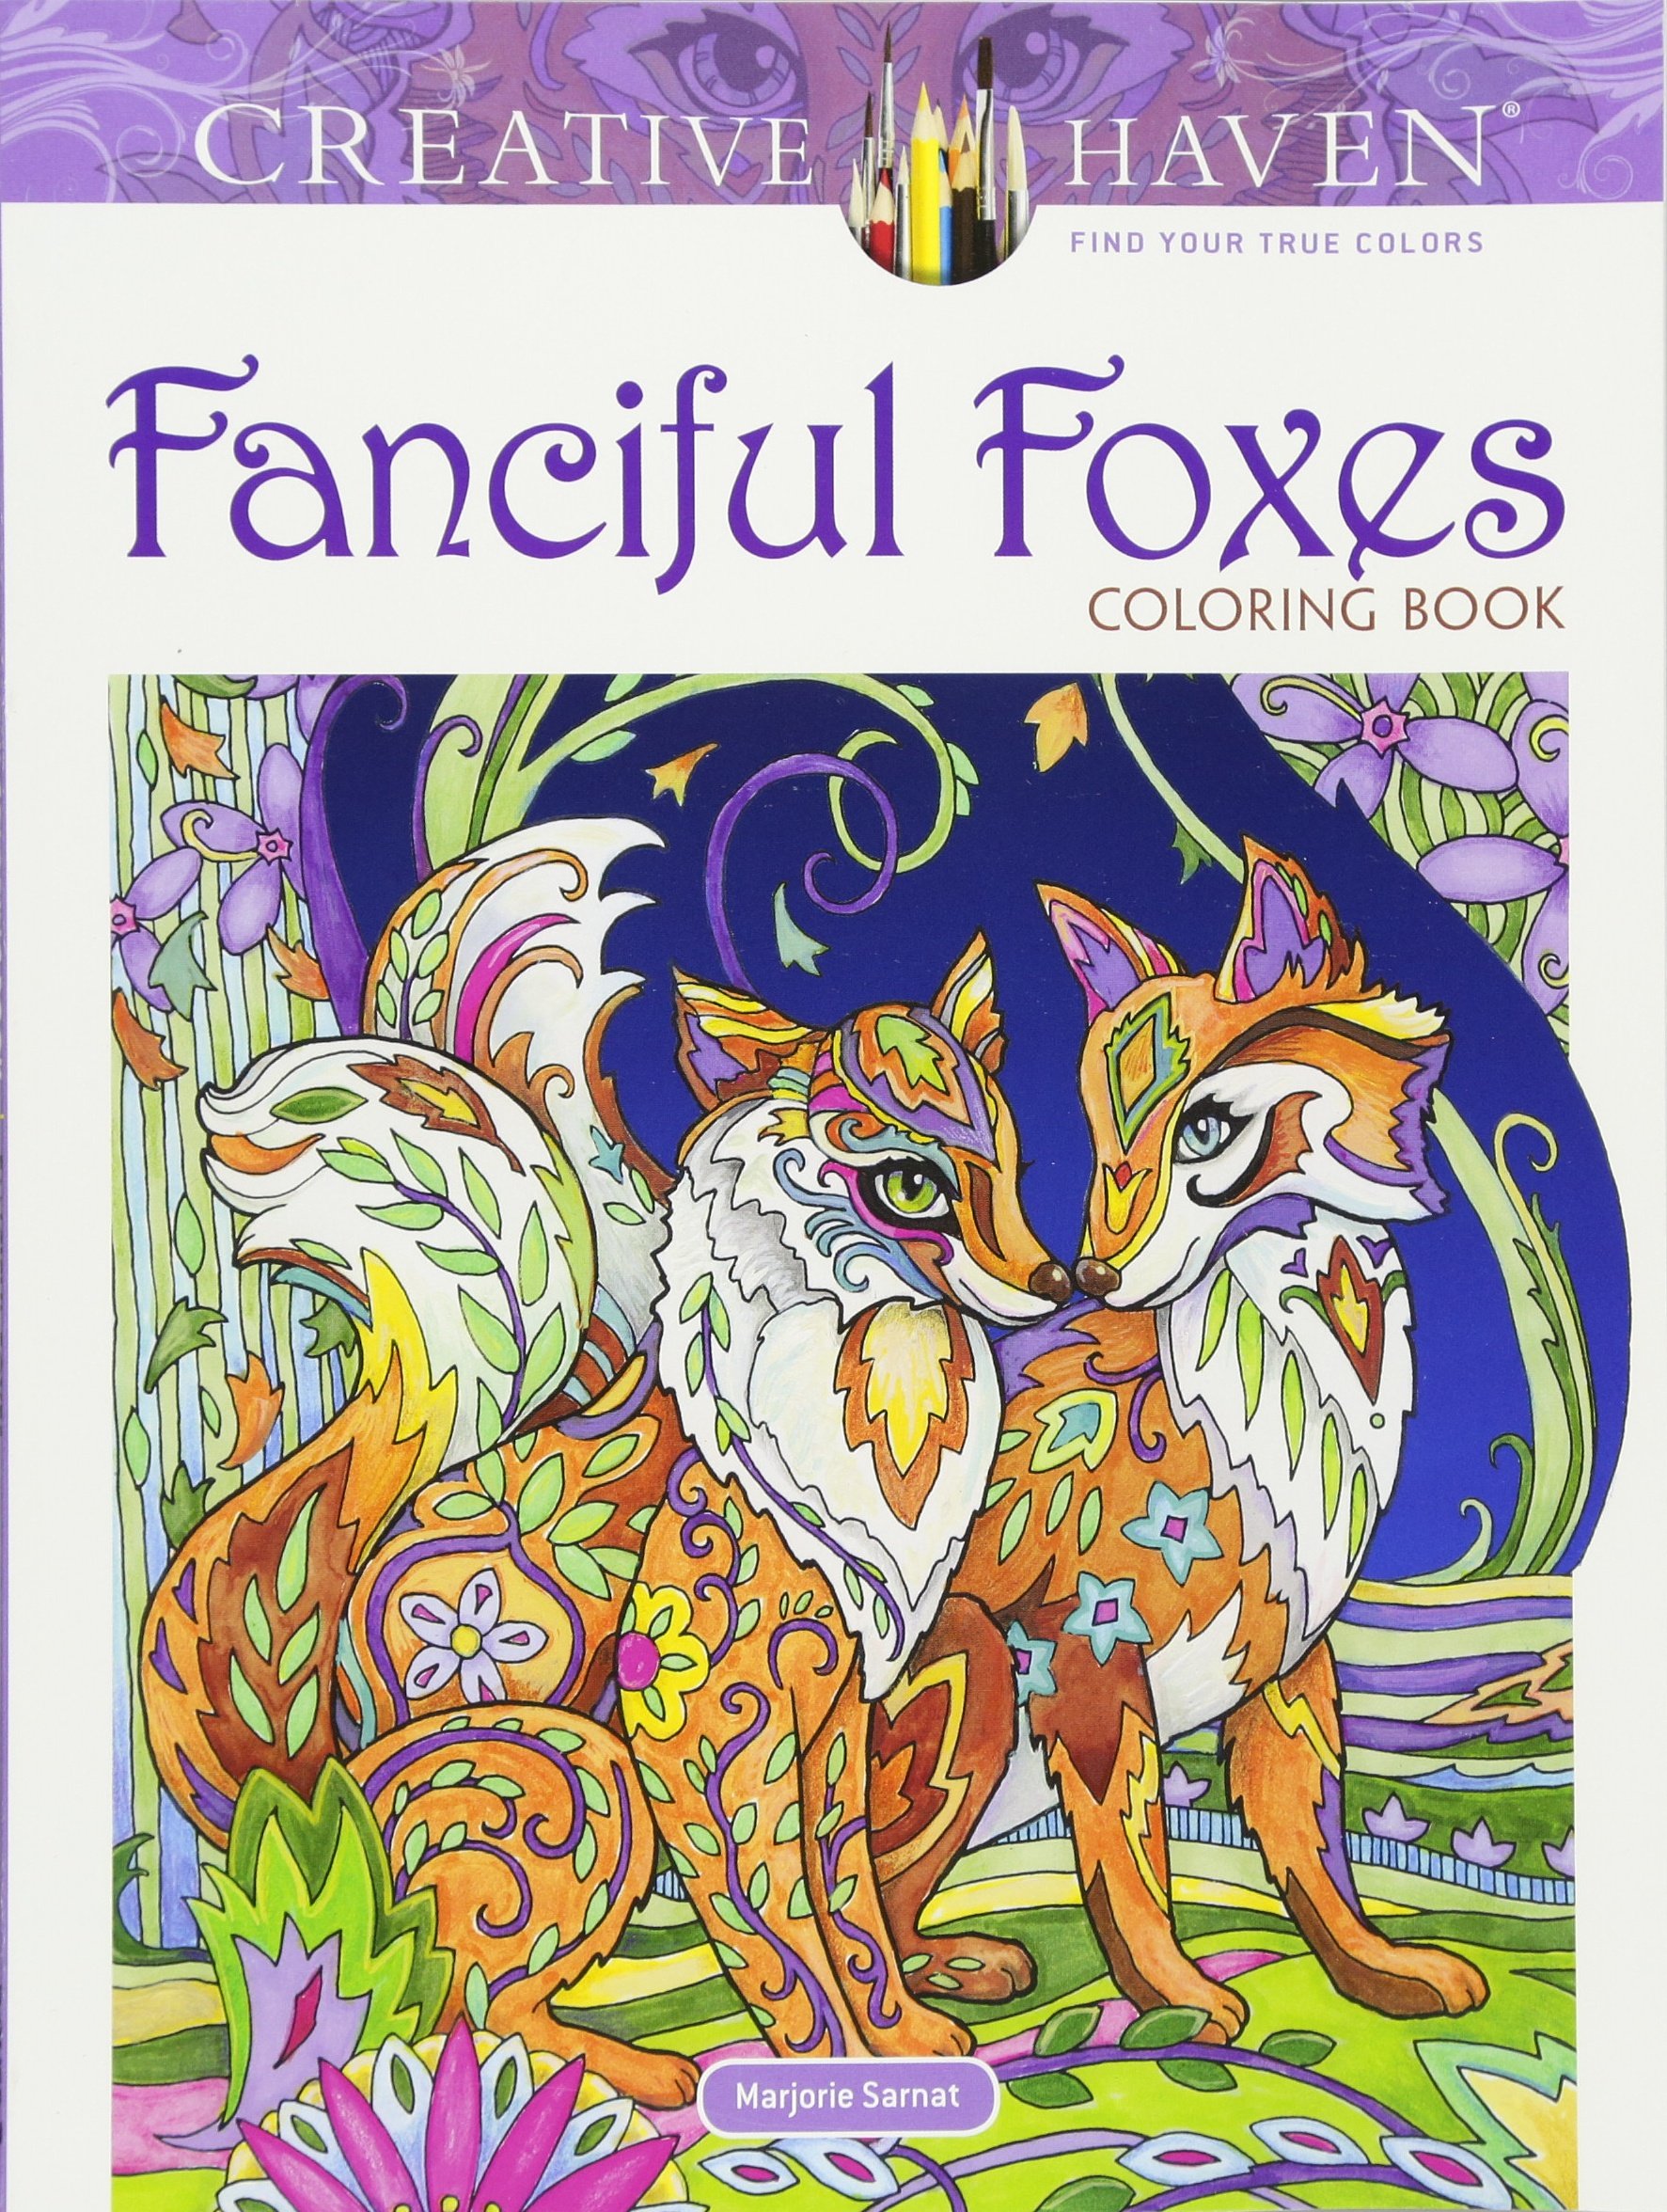  Fanciful Foxes Coloring Book